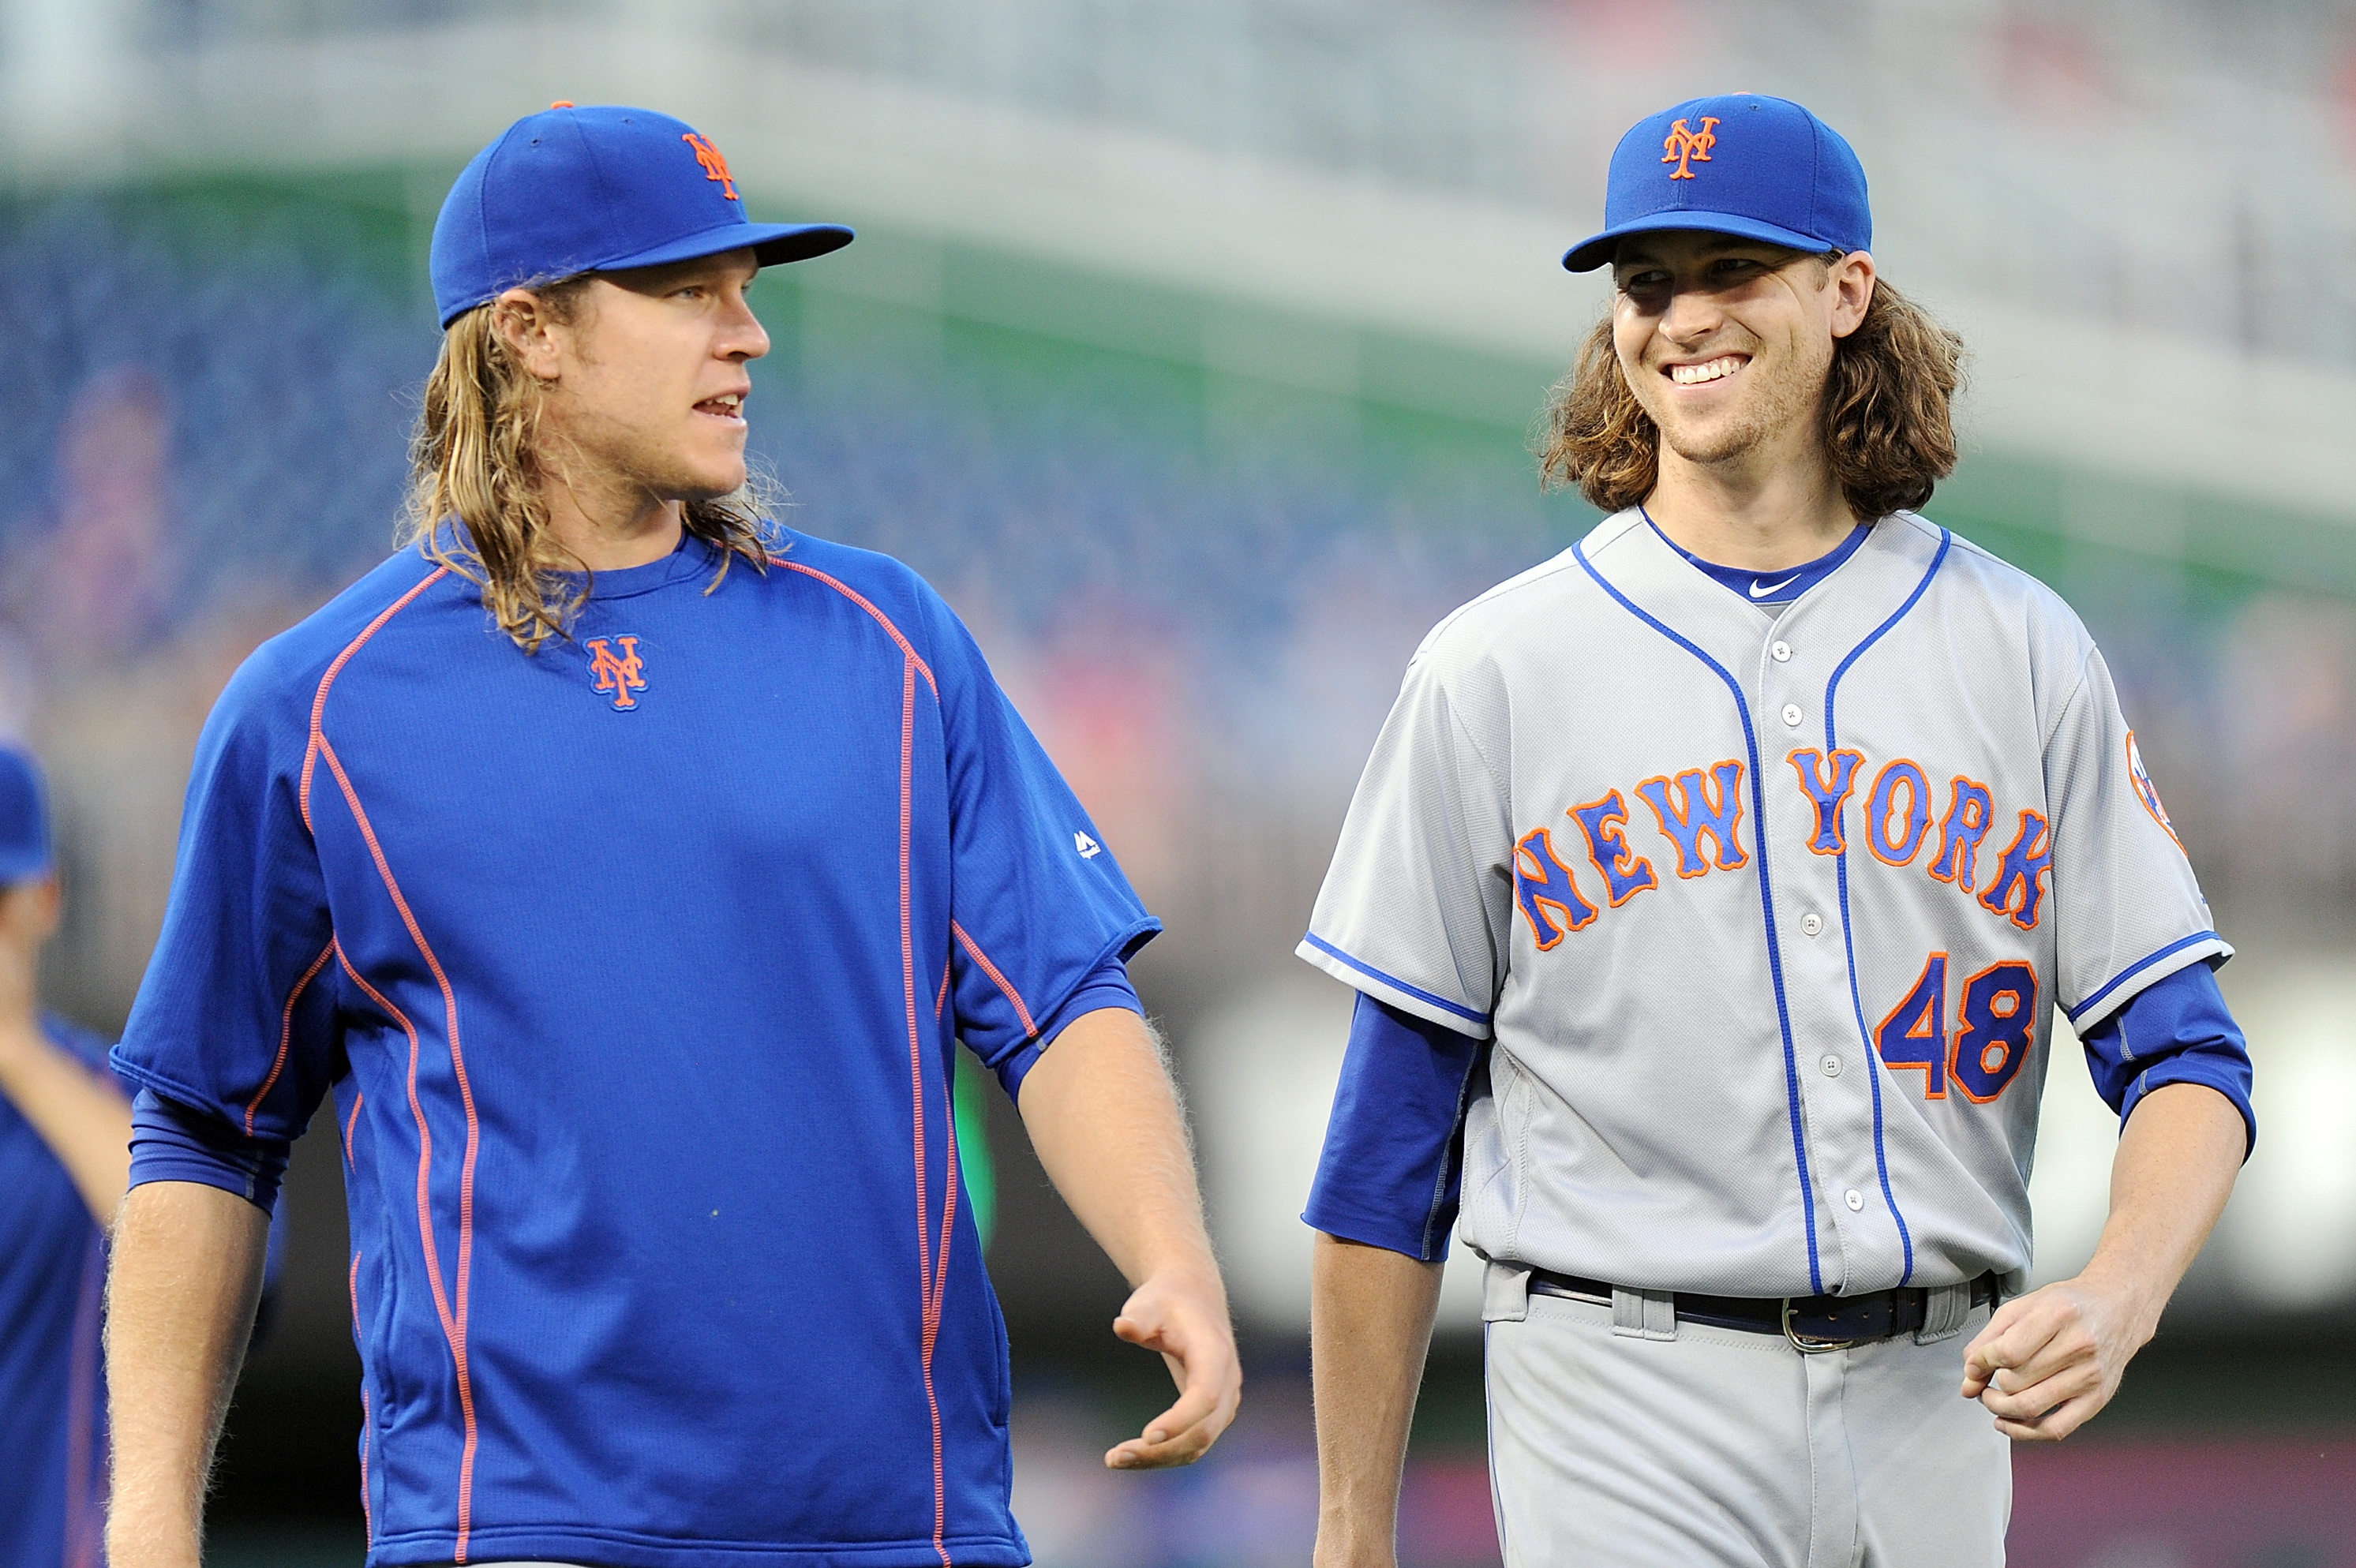 Noah Syndergaard reminds us he's still dating a bombshell